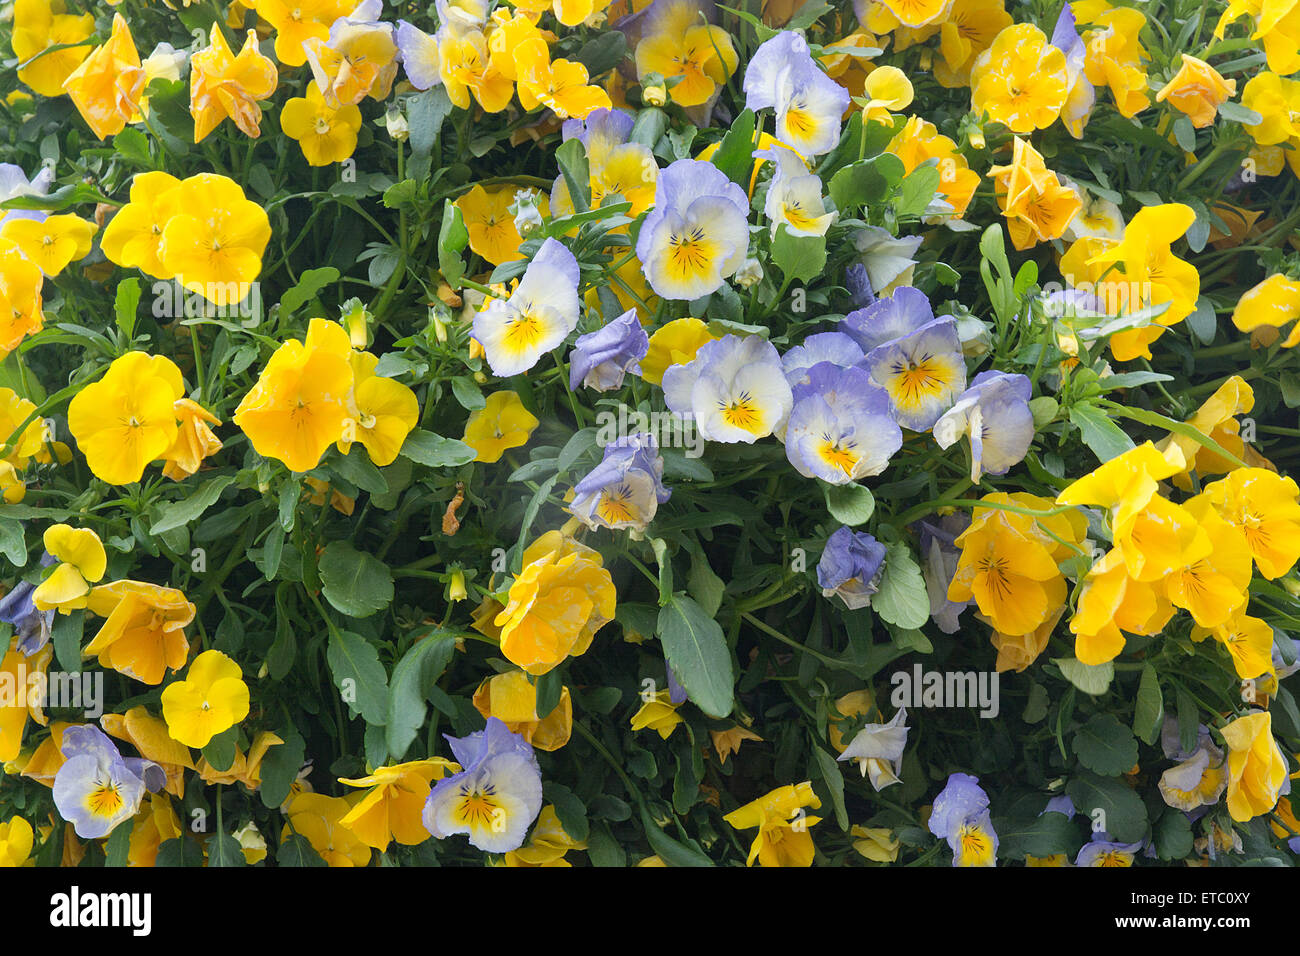 Yellow and blue or purple pansy flowers closeup full frame background. Stock Photo